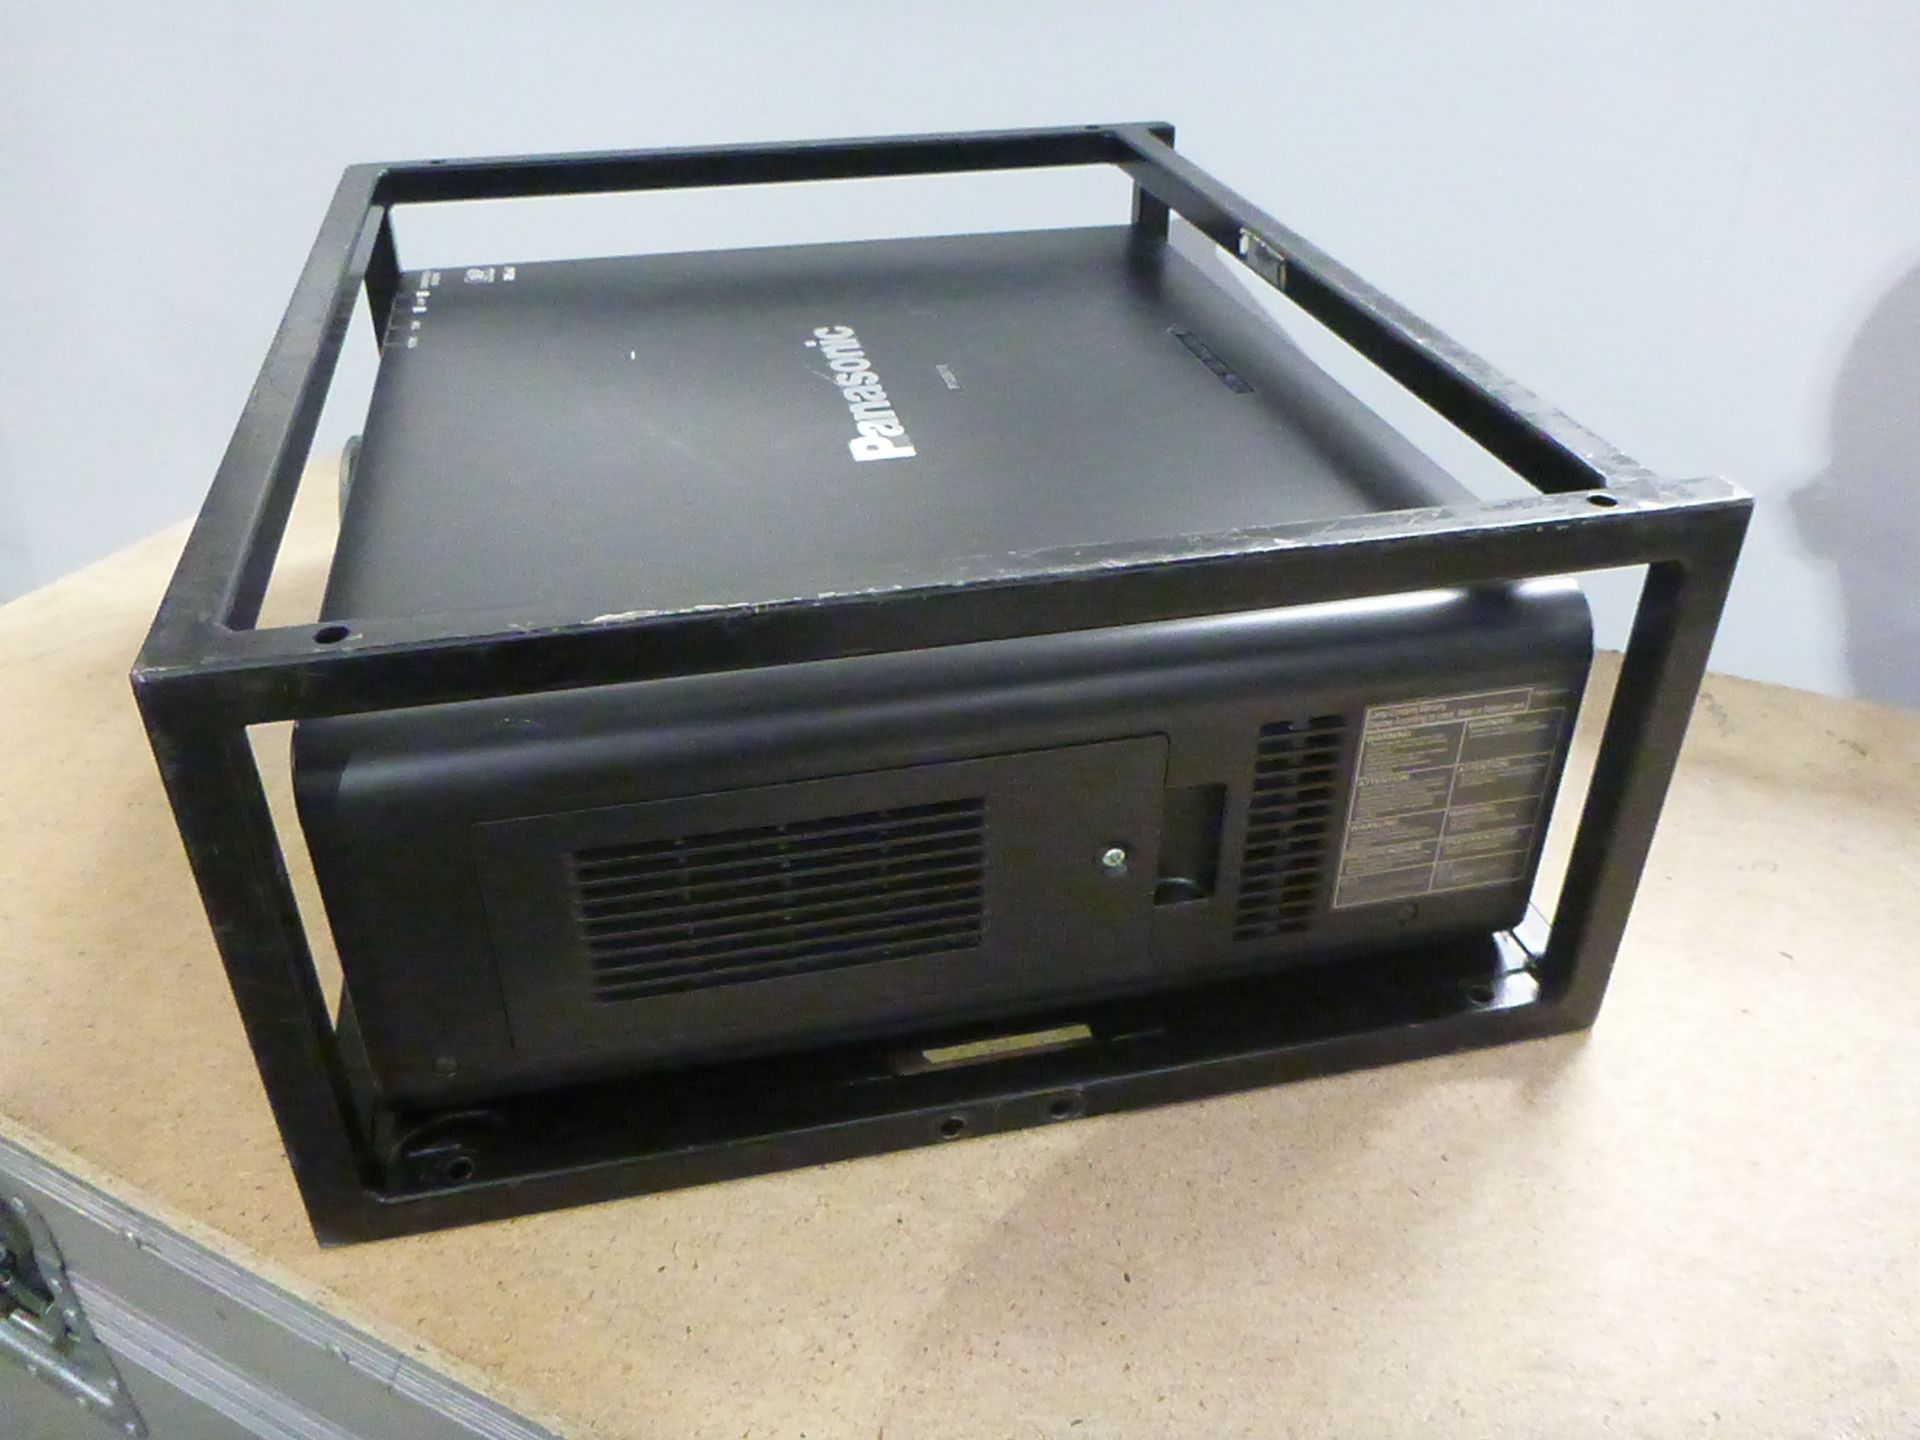 Panasonic Projector, Model PT-DZ6710E, S/N SH0150015, YOM 2010, In flight case with standard 1.3-1. - Image 2 of 13